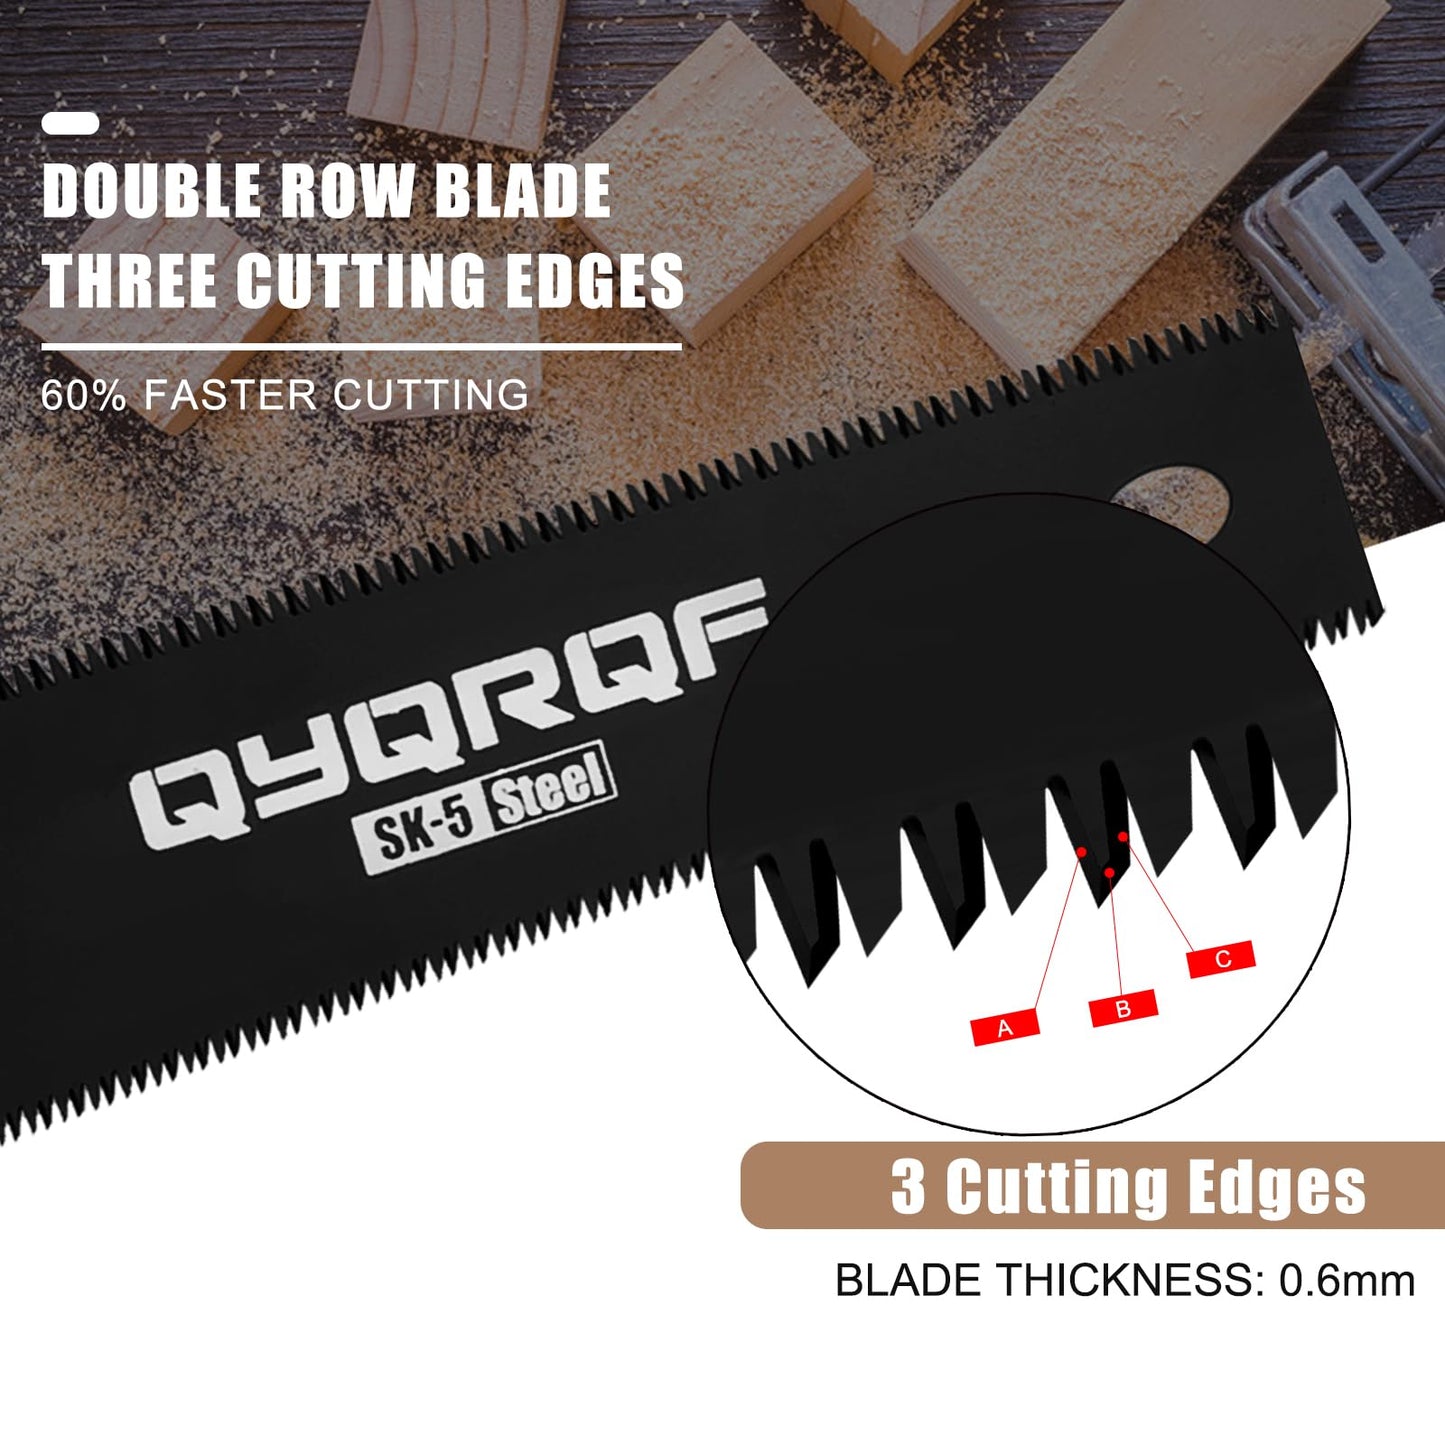 QYQRQF Small Hand Saw, 6 Inch Japanese Pull Saw with Double Edges 15/17 TPI Flush Cut Saw for Woodworking DIY Projects